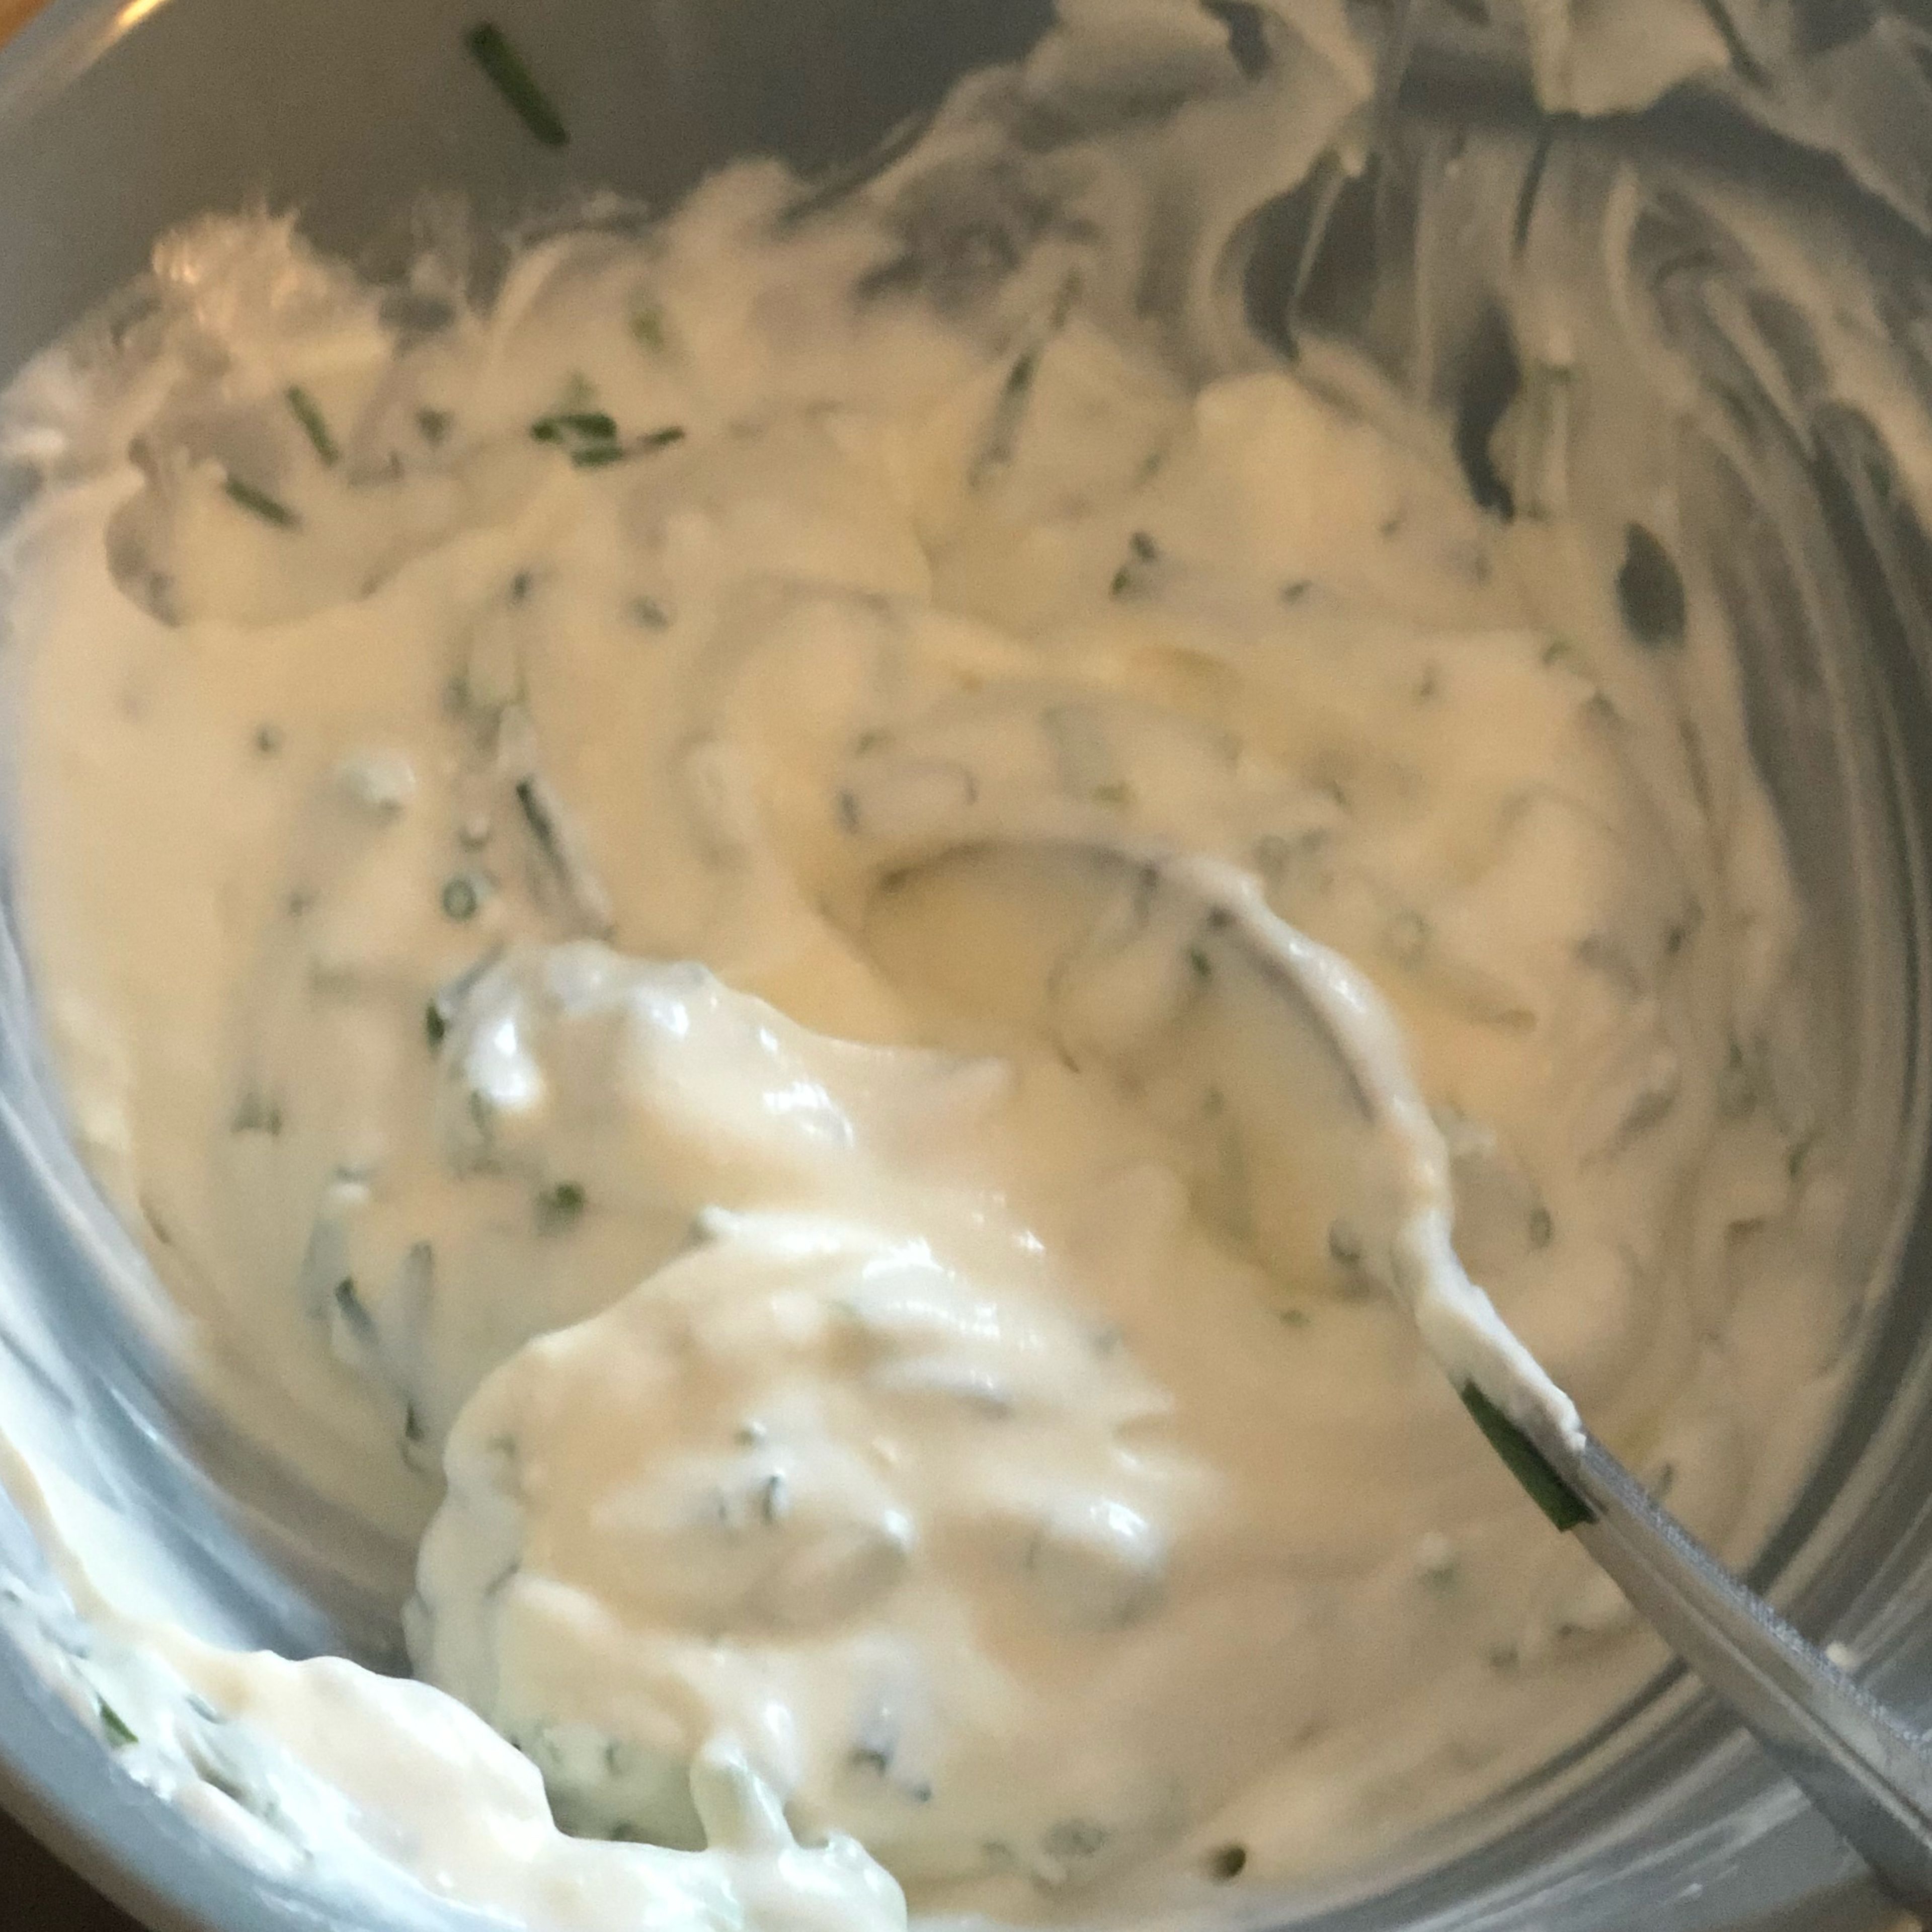 Mix the sour cream, chives, lemon zest and some salt and pepper in a bowl